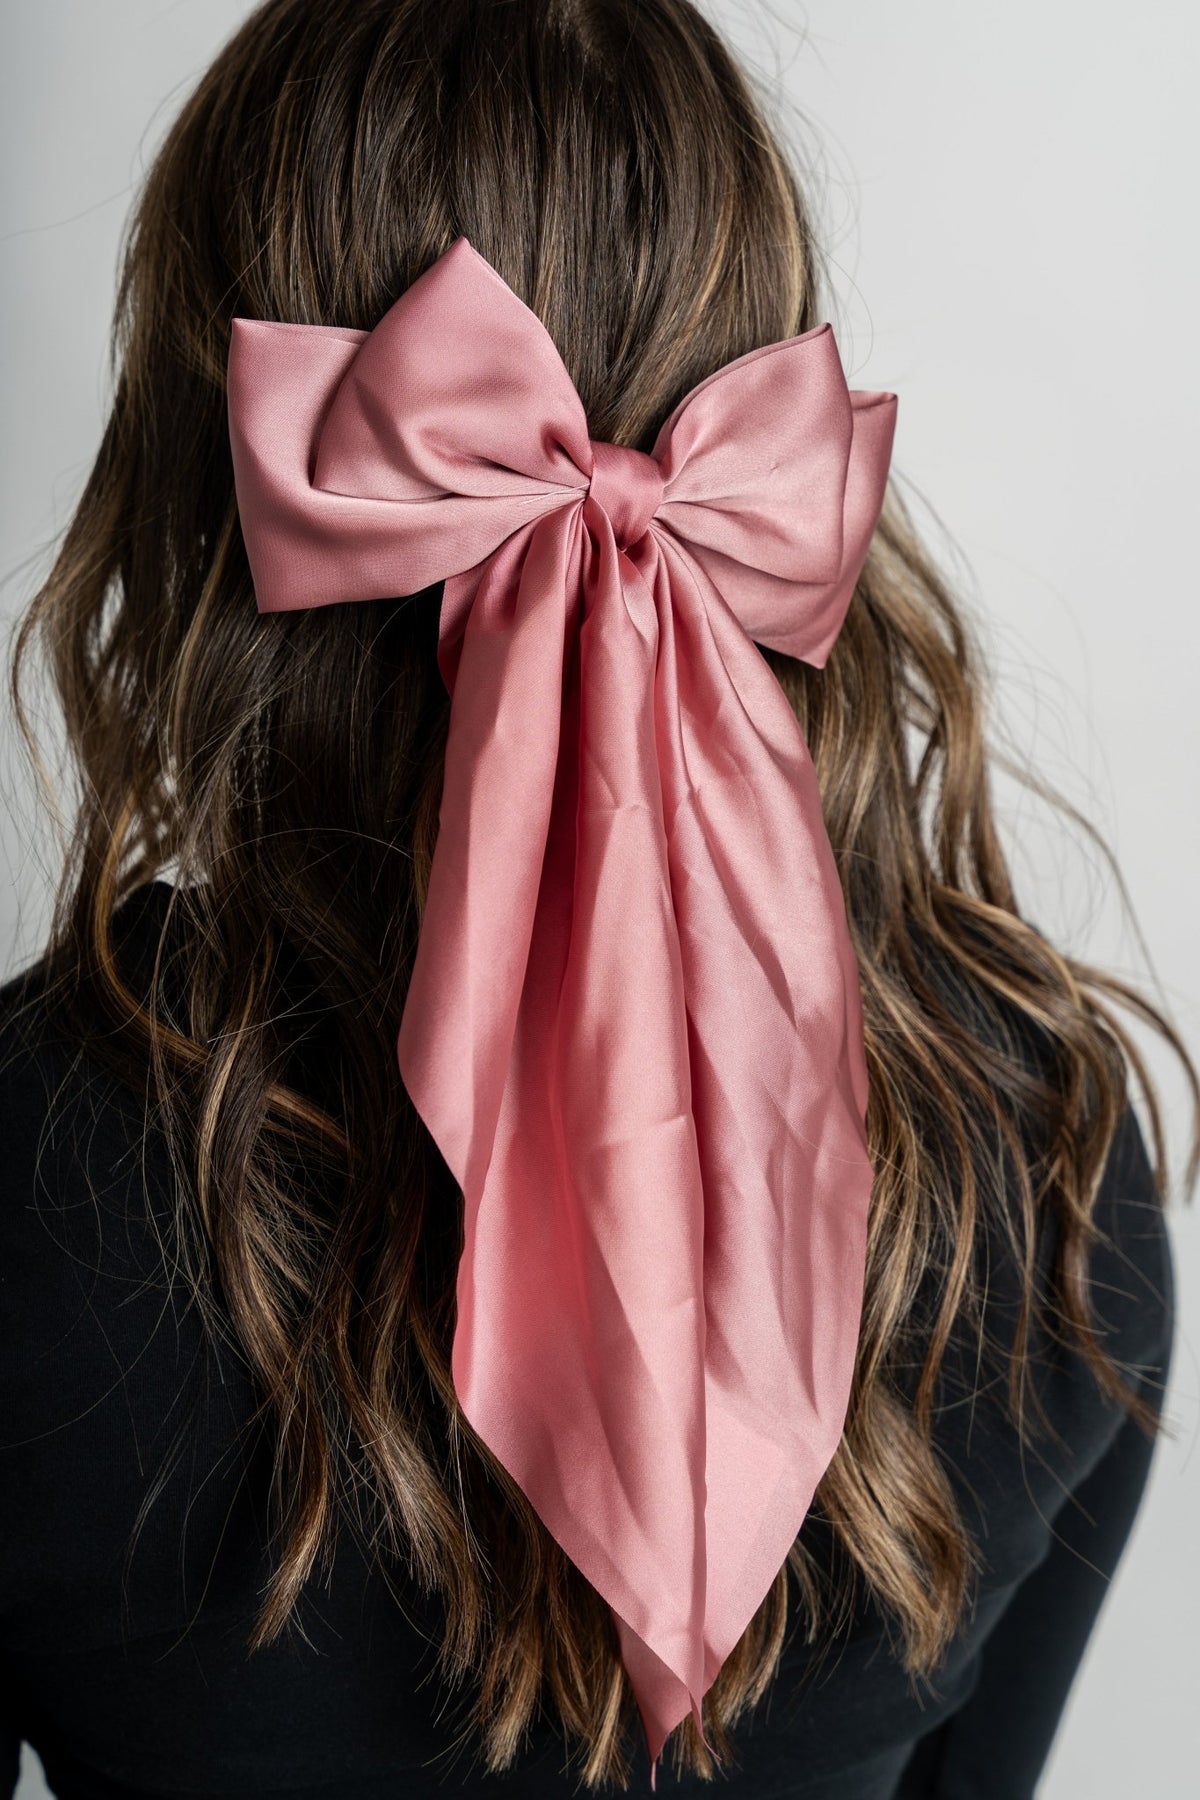 Butterfly satin hair bow clip pink - Trendy Gifts at Lush Fashion Lounge Boutique in Oklahoma City